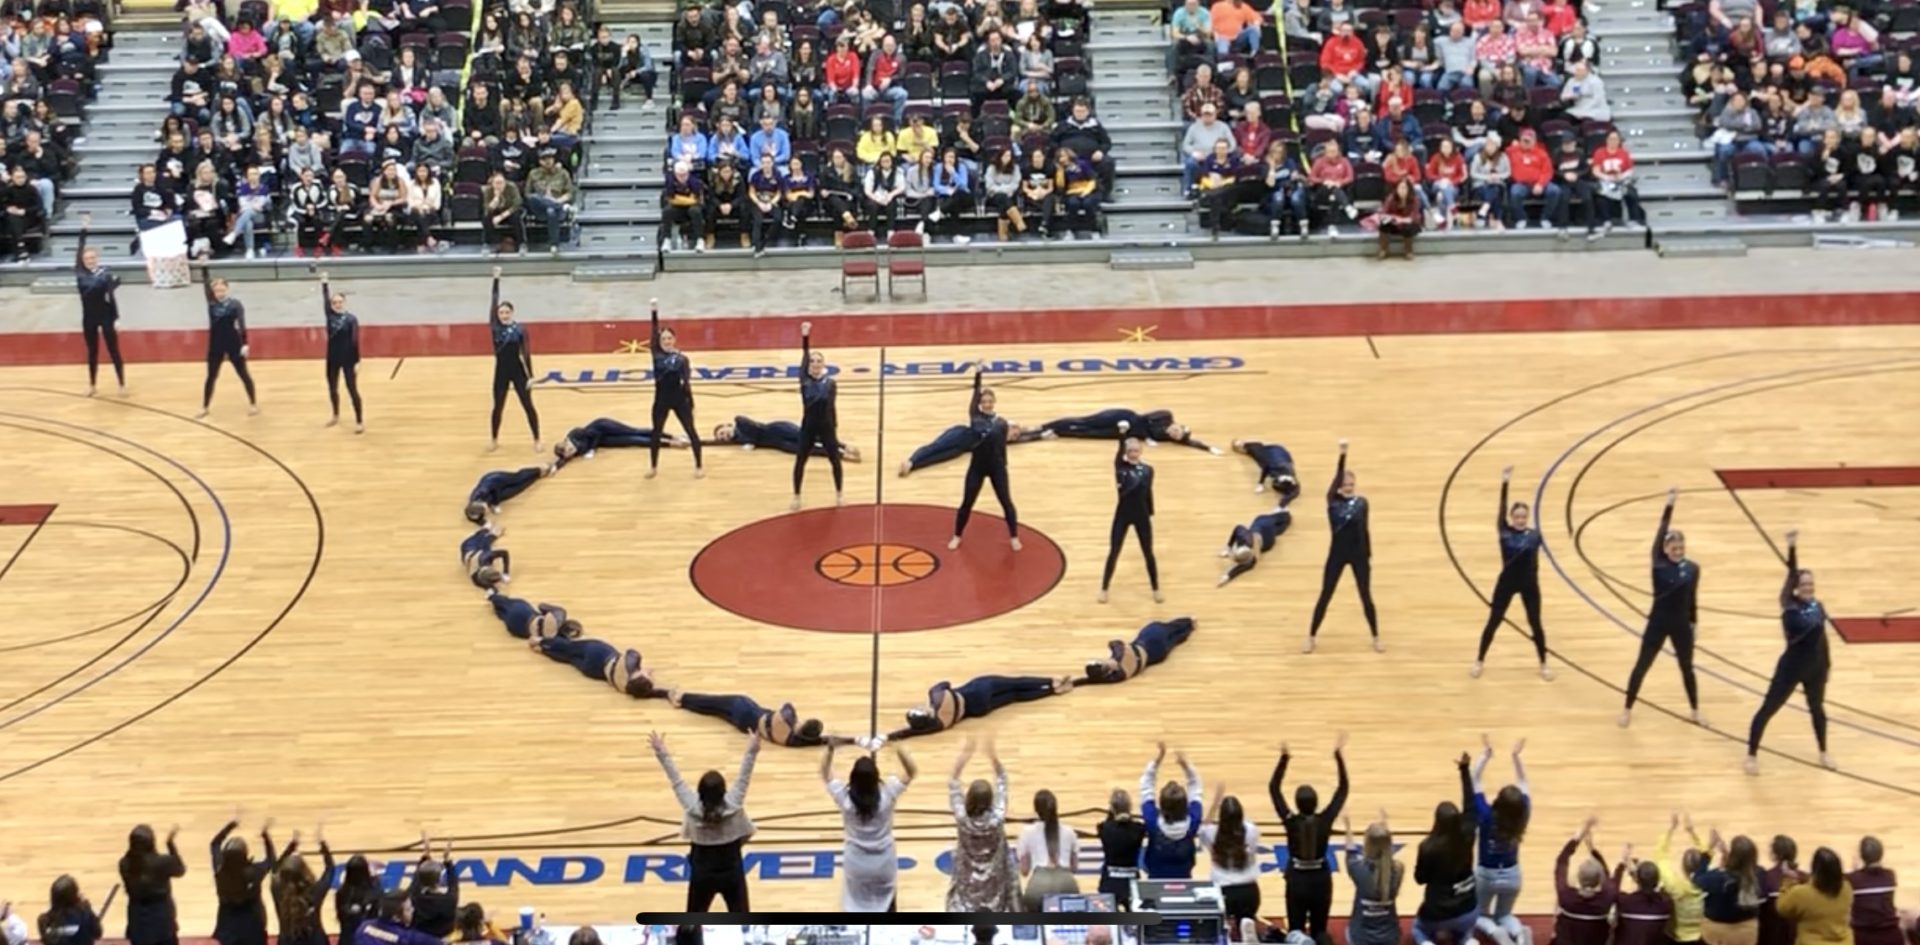 Team performing in a heart shape.